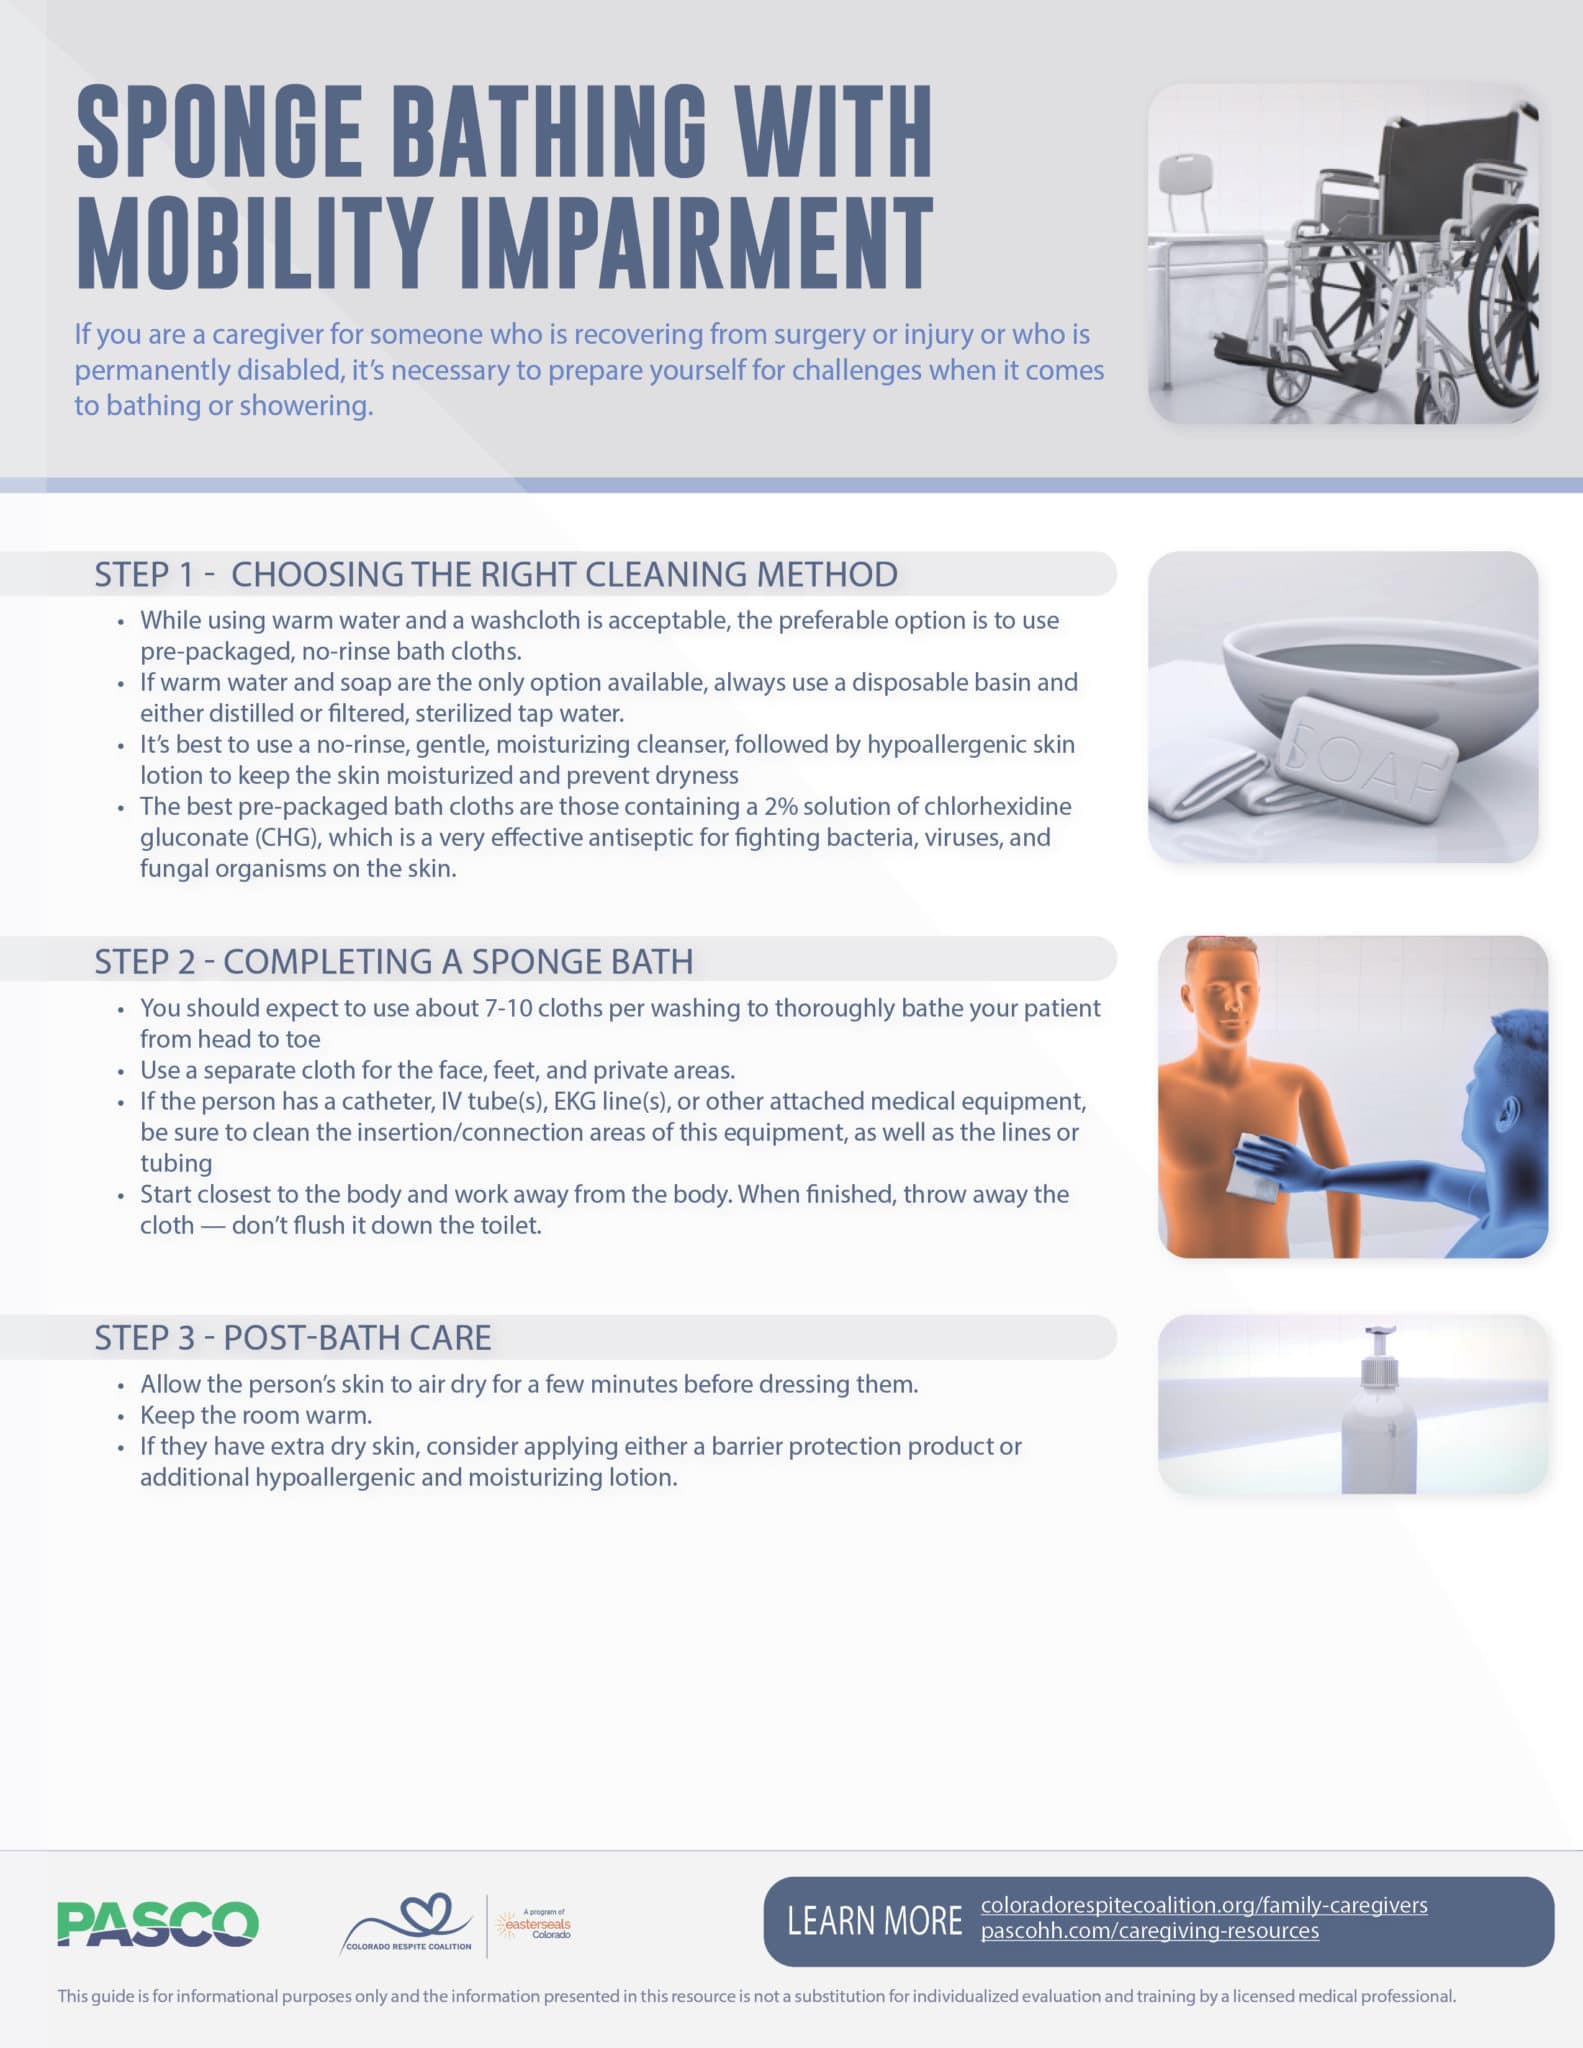 Sponge Bathing With Mobility Impairment